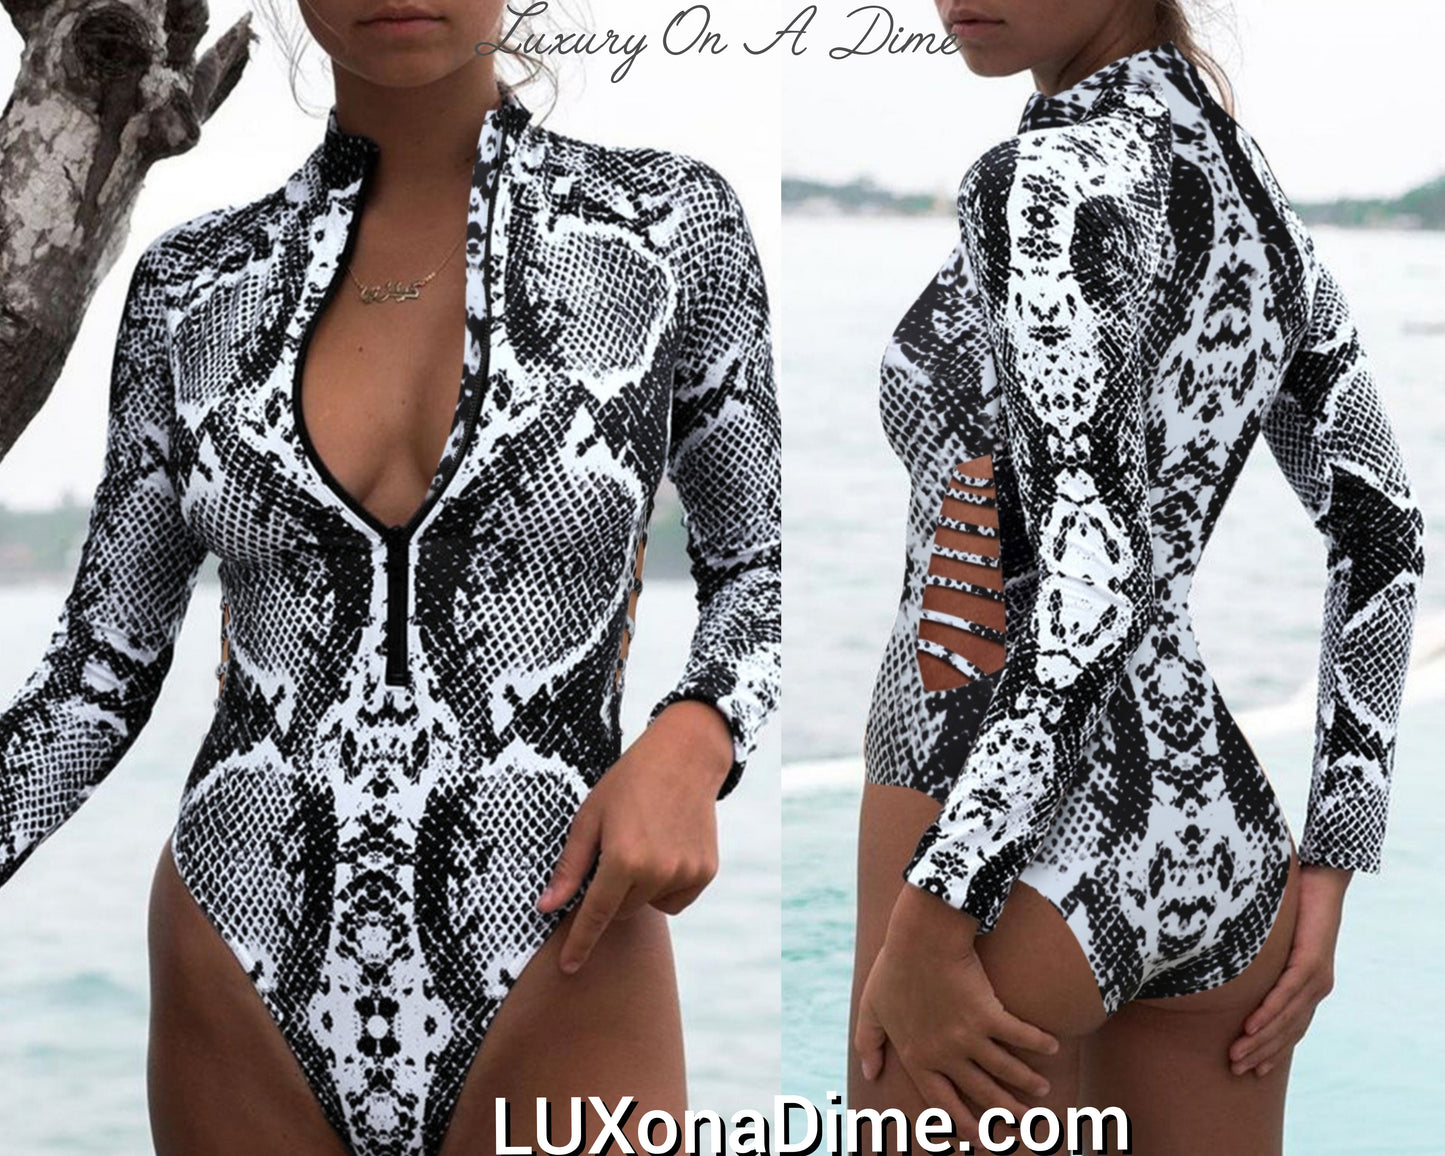 Animal Print Zipper Plunge Cut-Out Side Longsleeve Wetsuit (Plus Size Available)